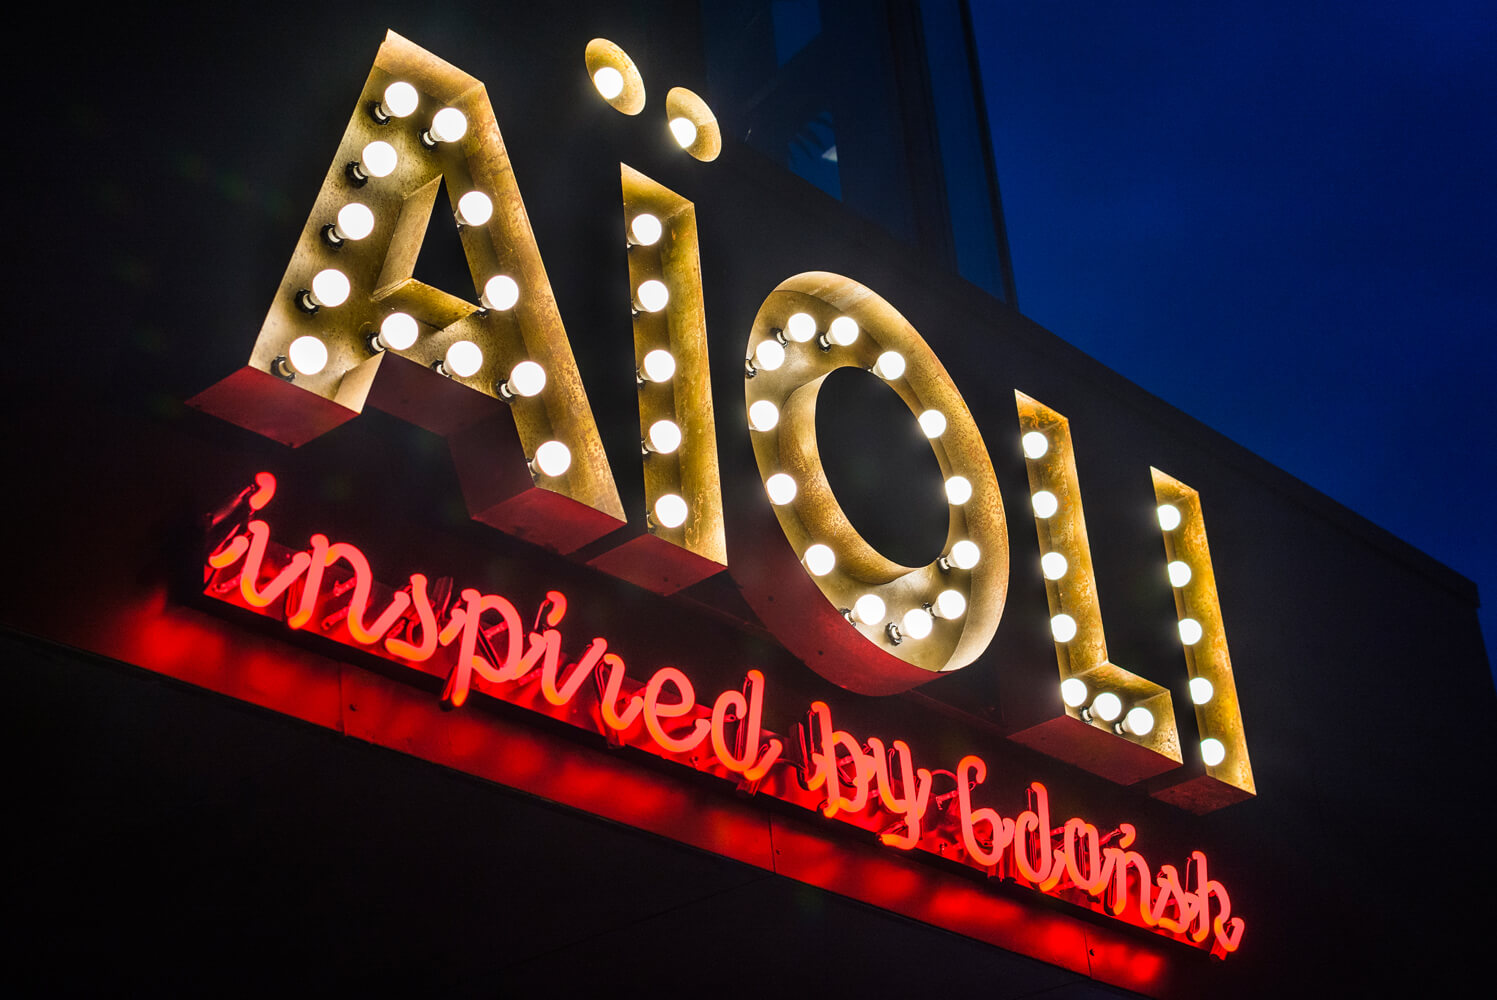 Aioli - Aioli - company sign composed of letters with bulbs above the entrance